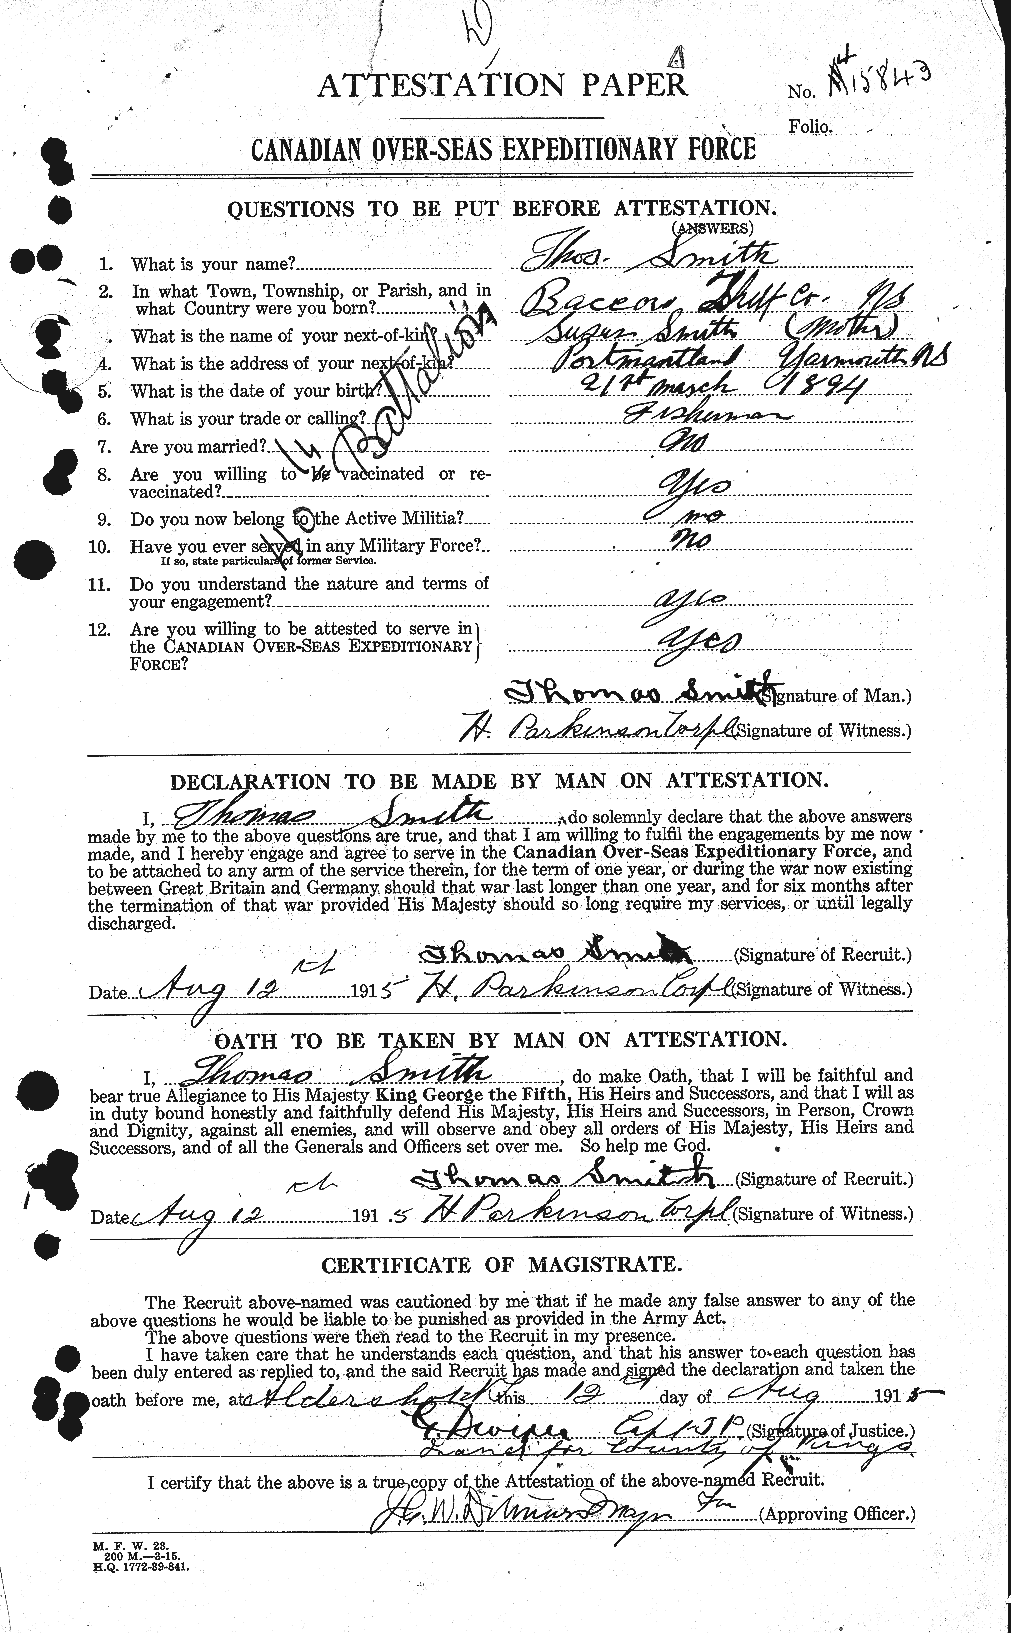 Personnel Records of the First World War - CEF 106676a